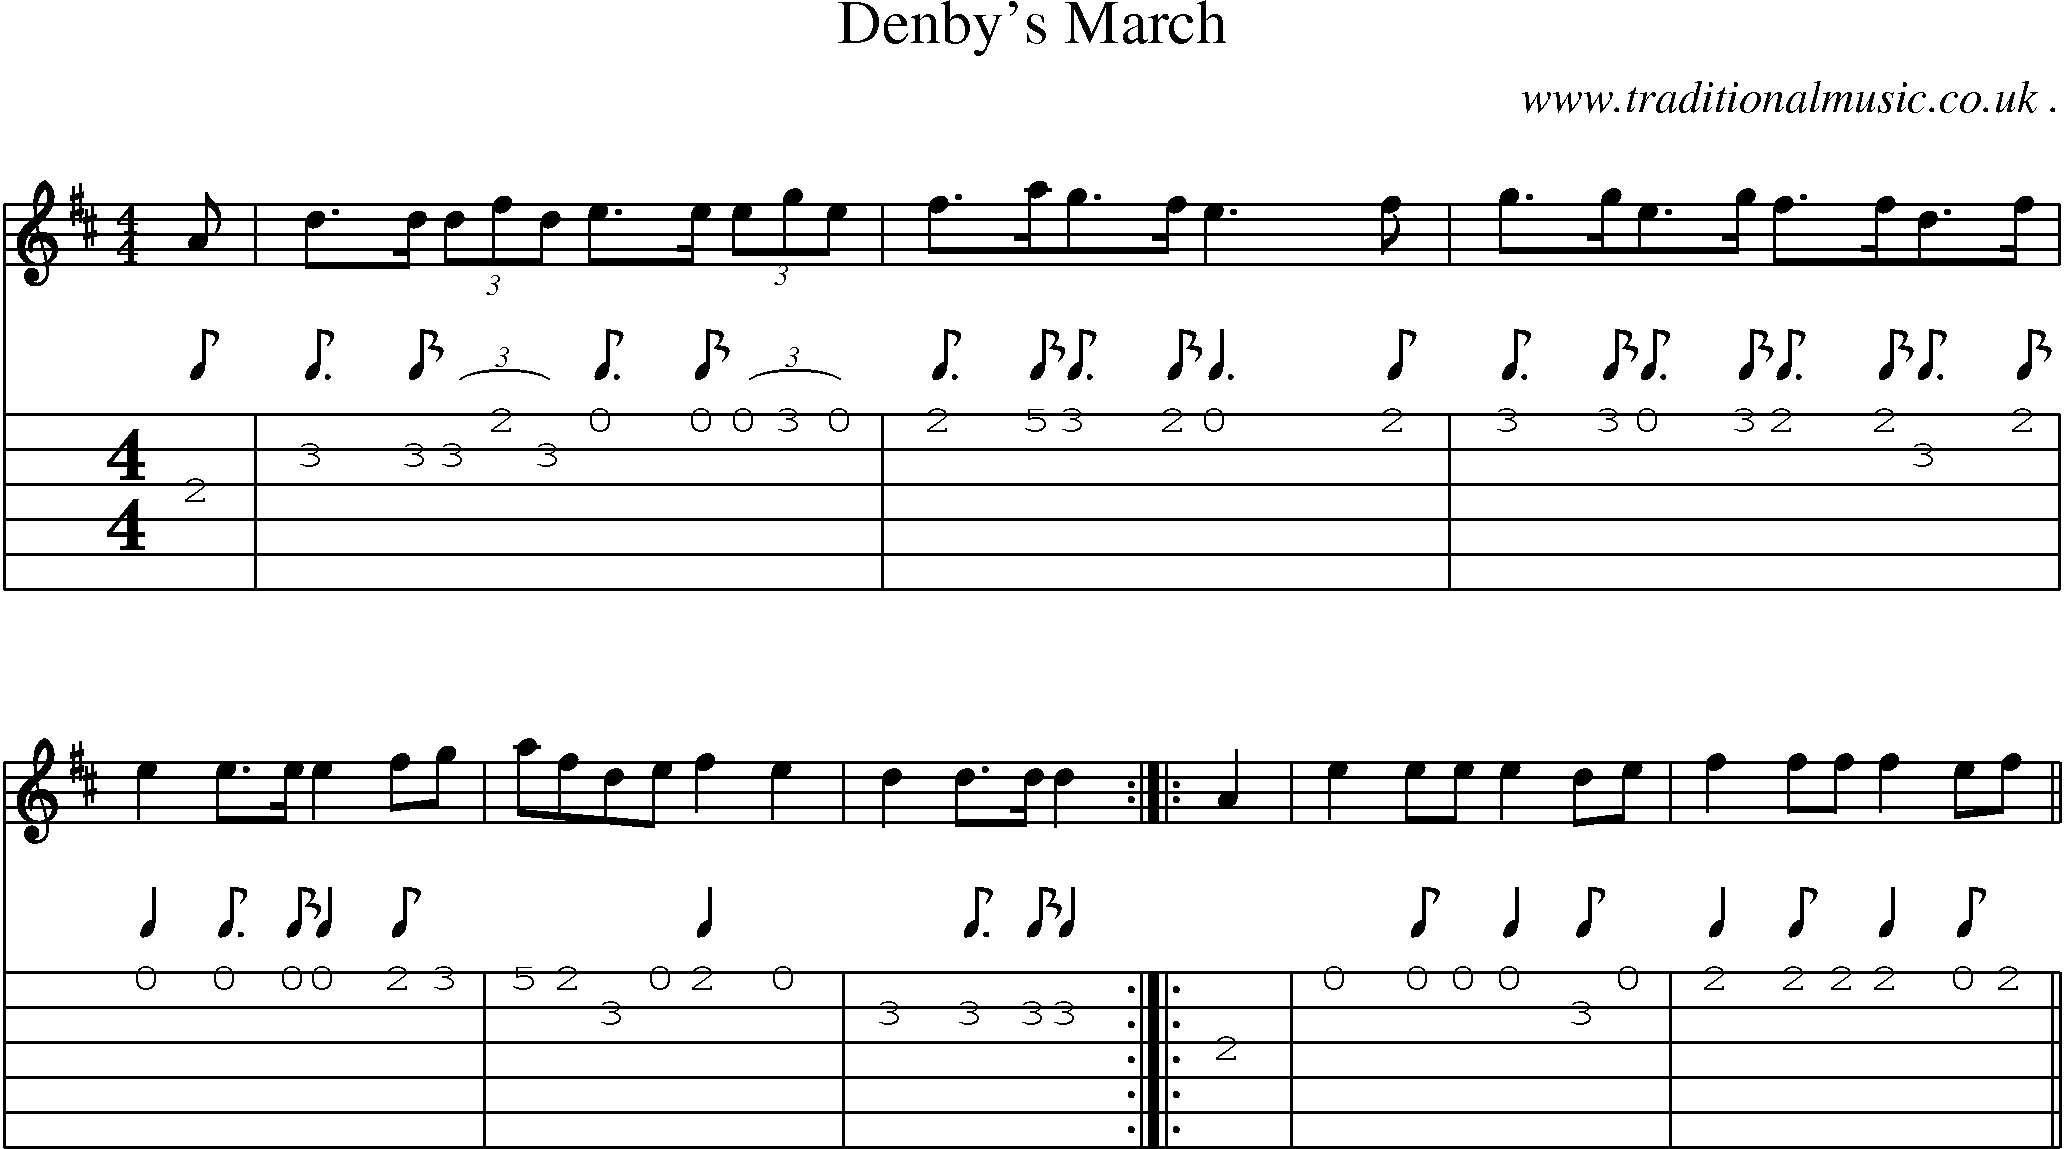 Sheet-Music and Guitar Tabs for Denbys March